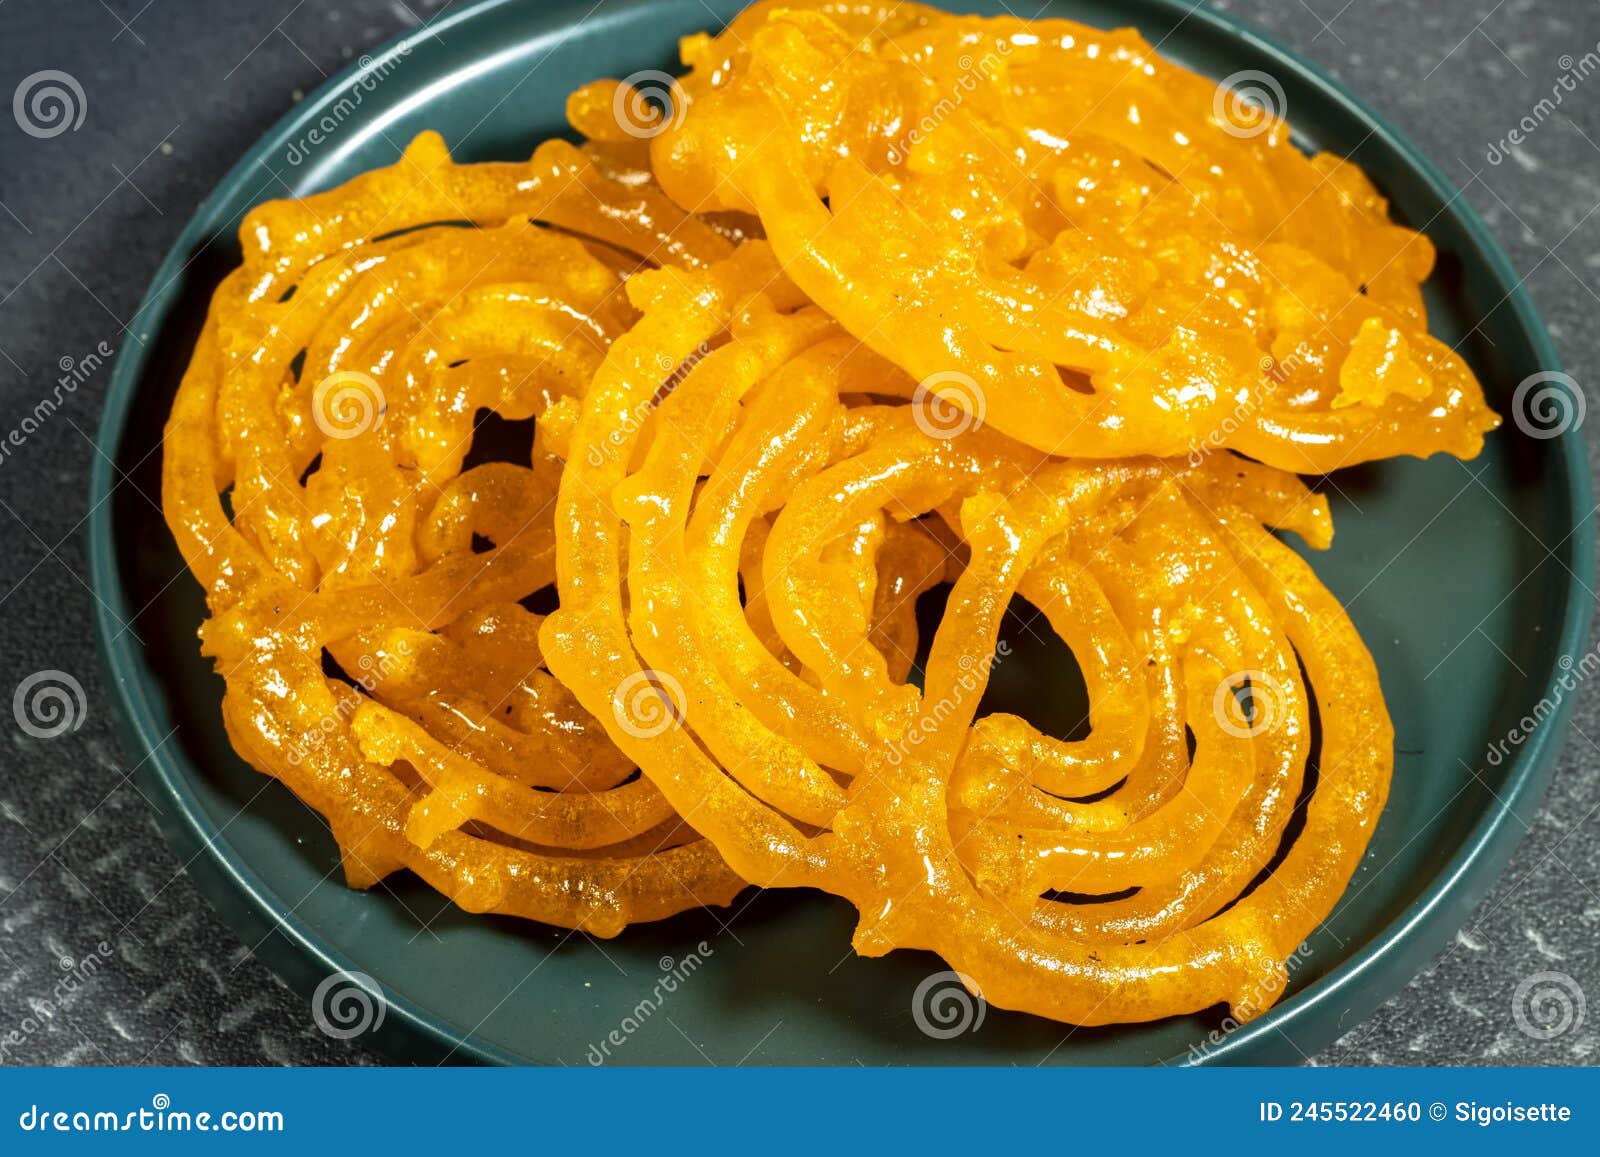 algeria sweet food named zlabi, in inde named jalebi, it is prepared with flour and yogurt and honey and other ingredients